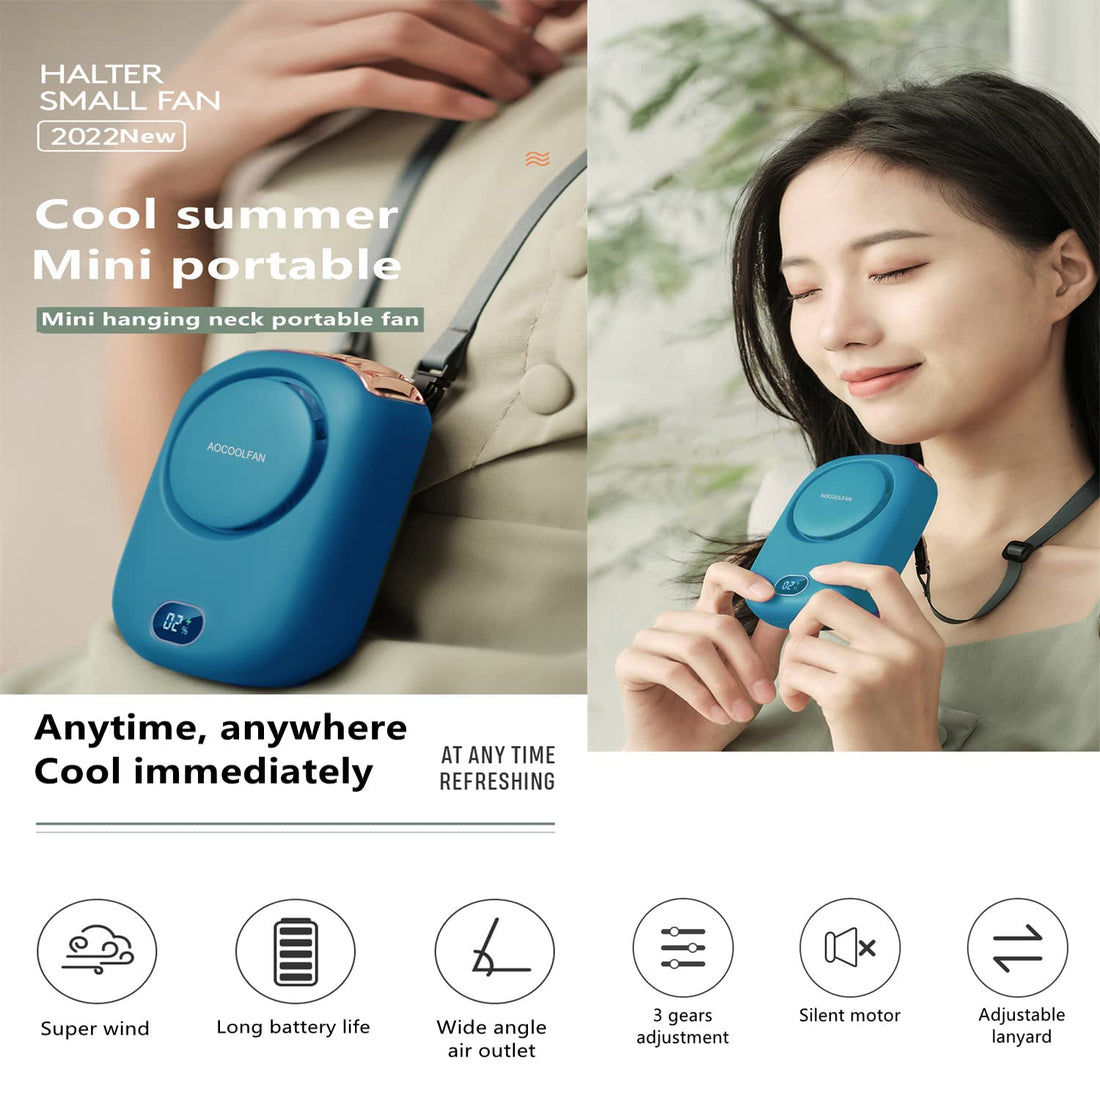 Mini Handheld Fan Portable Neck Fan Small Personal Fan USB Rechargeable 3 Speed Adjustable for Home Office Outdoor Travel (Blue)